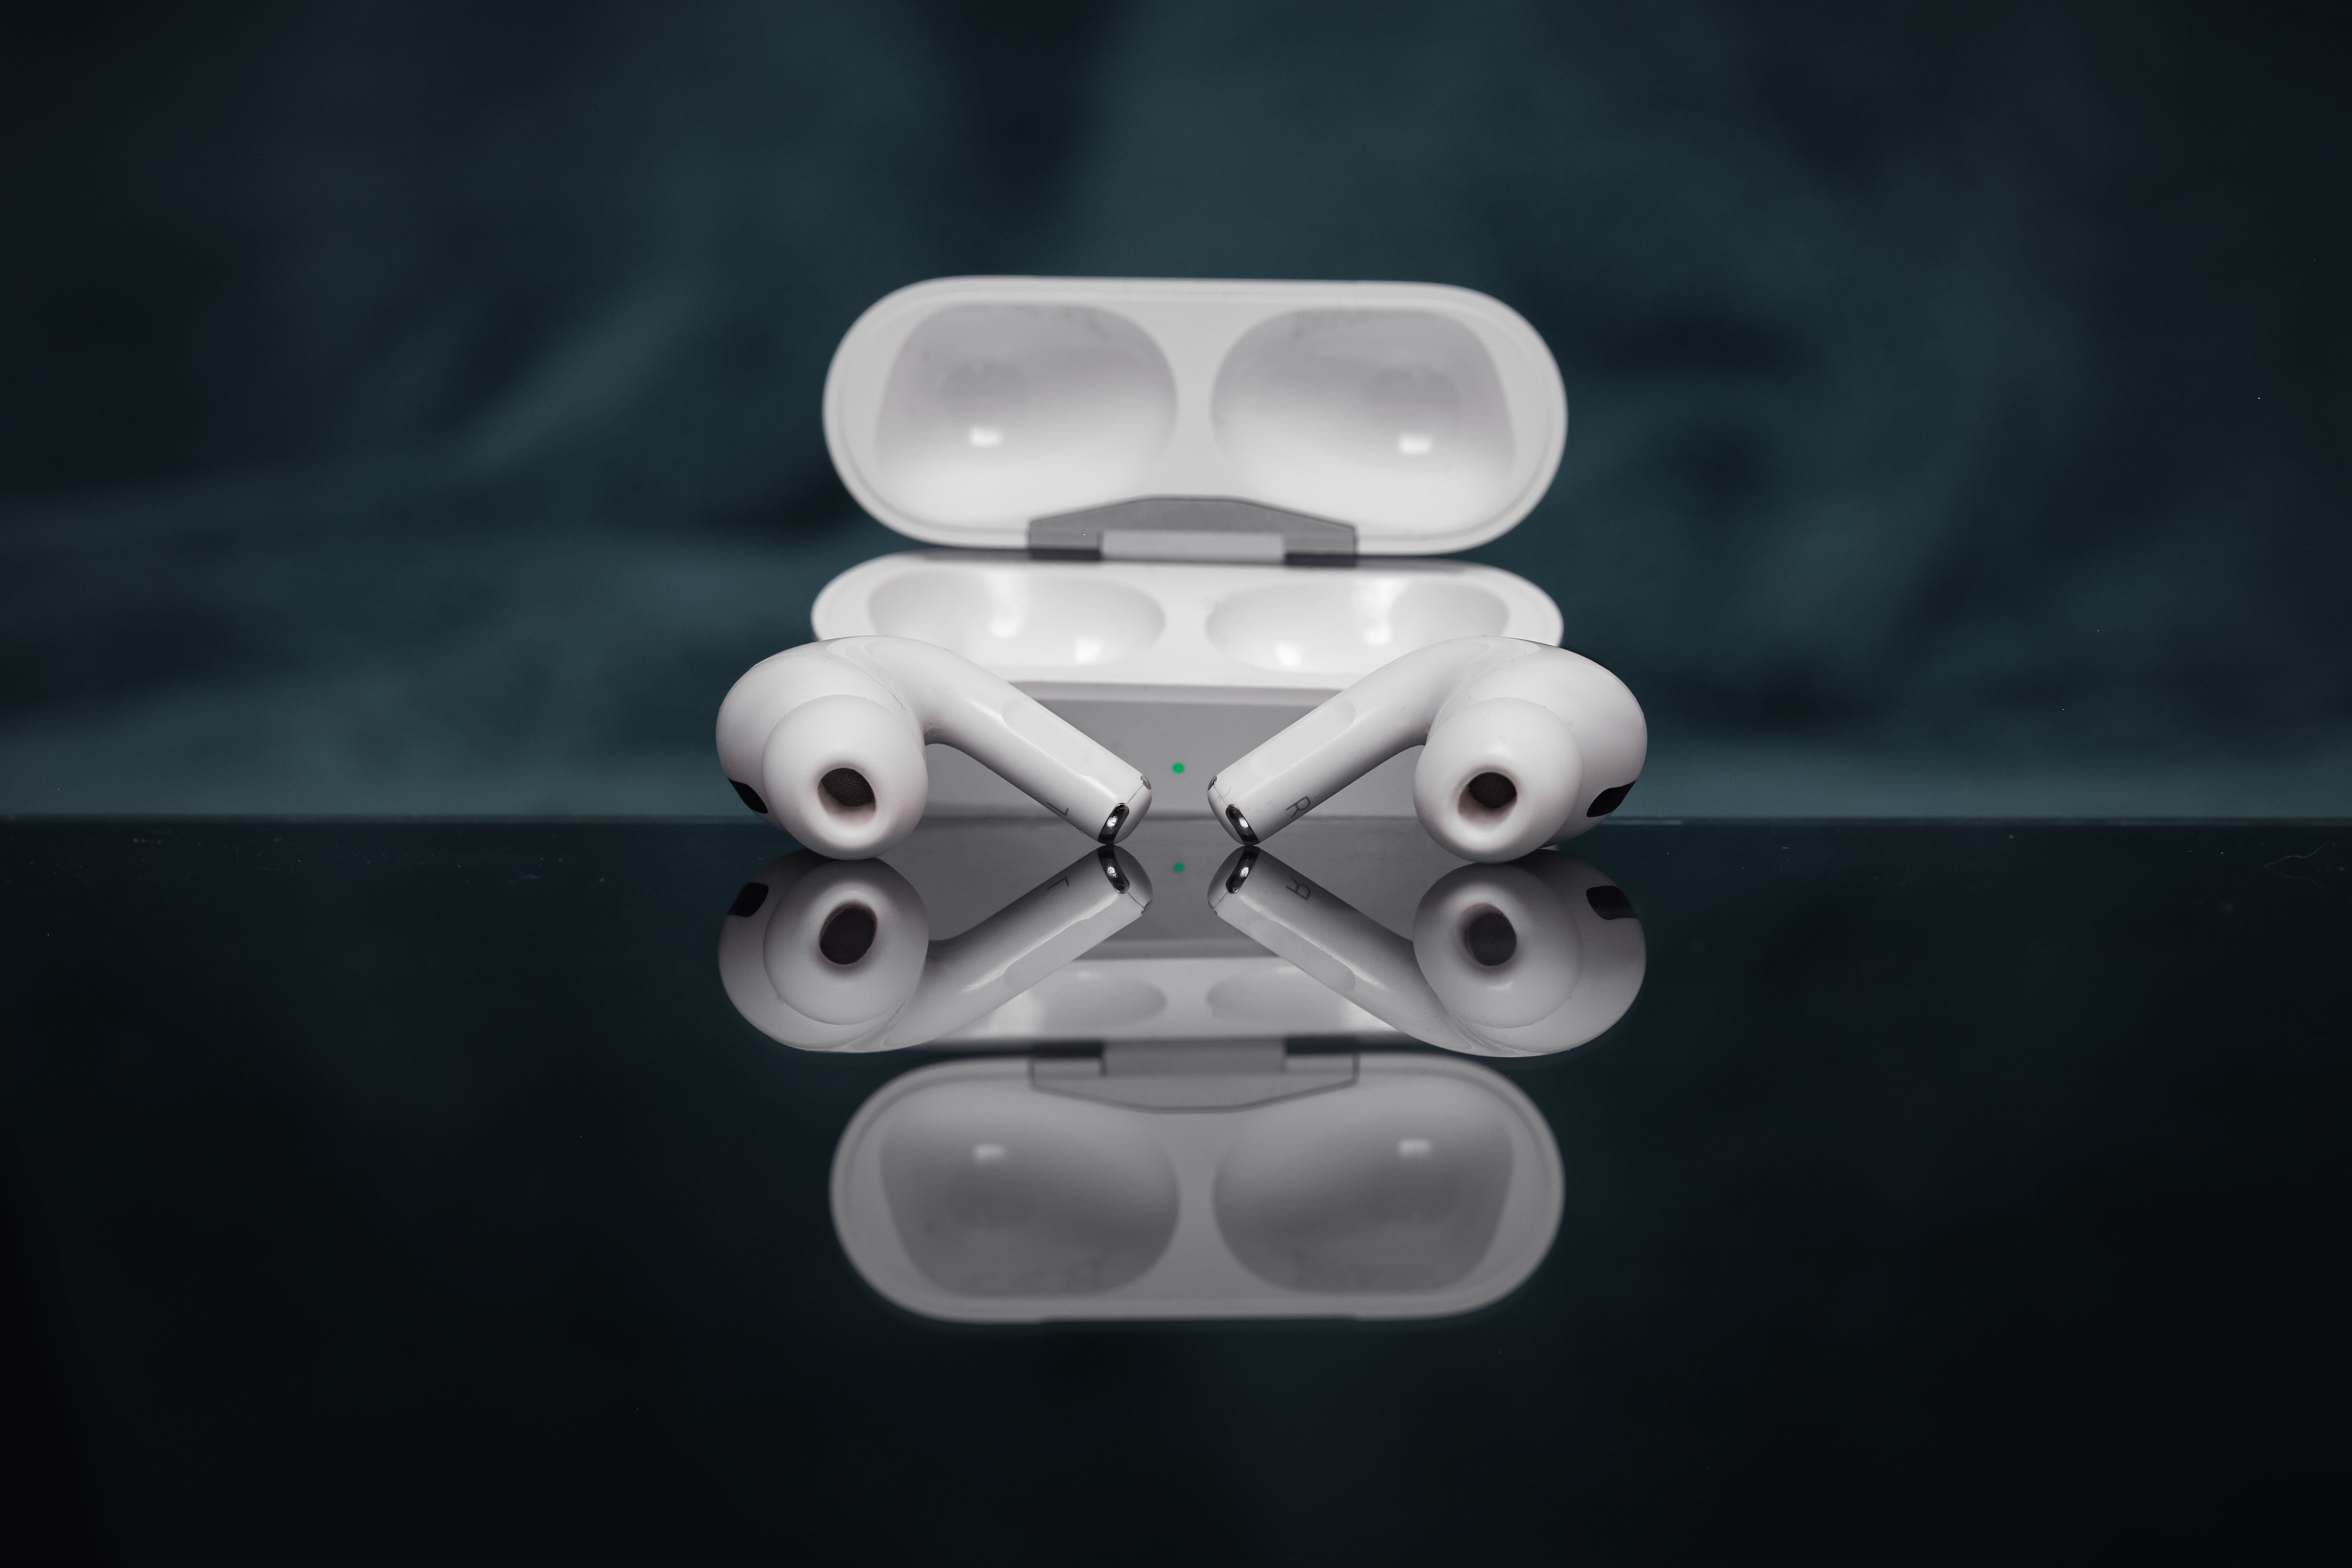 Photo of Apple AirPods on a desk